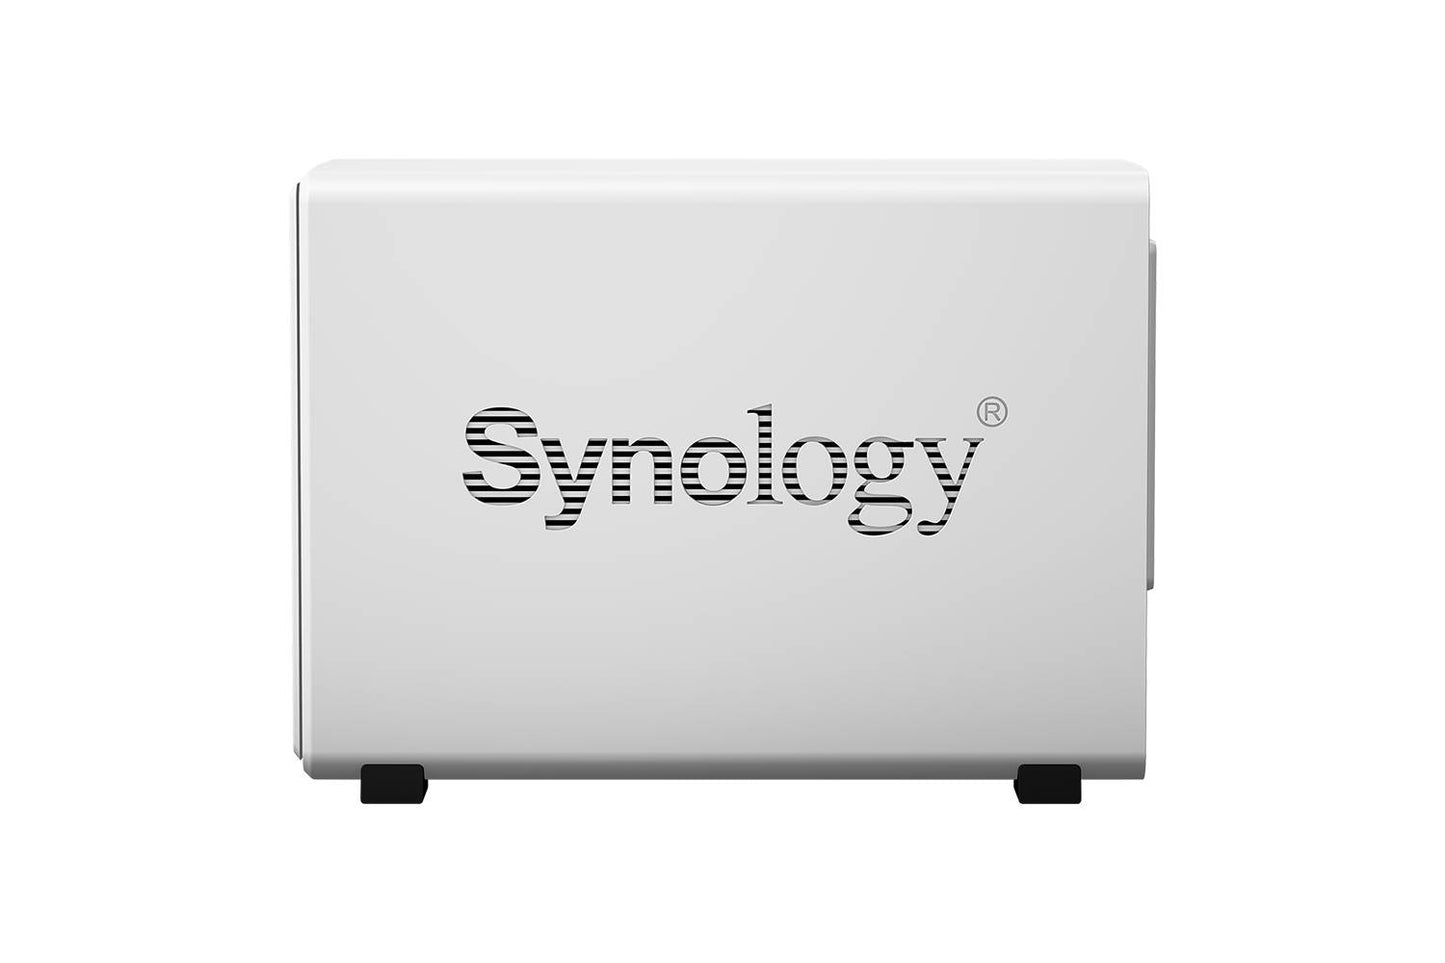 Synology DiskStation DS220j Network Attached Storage Drive (White)